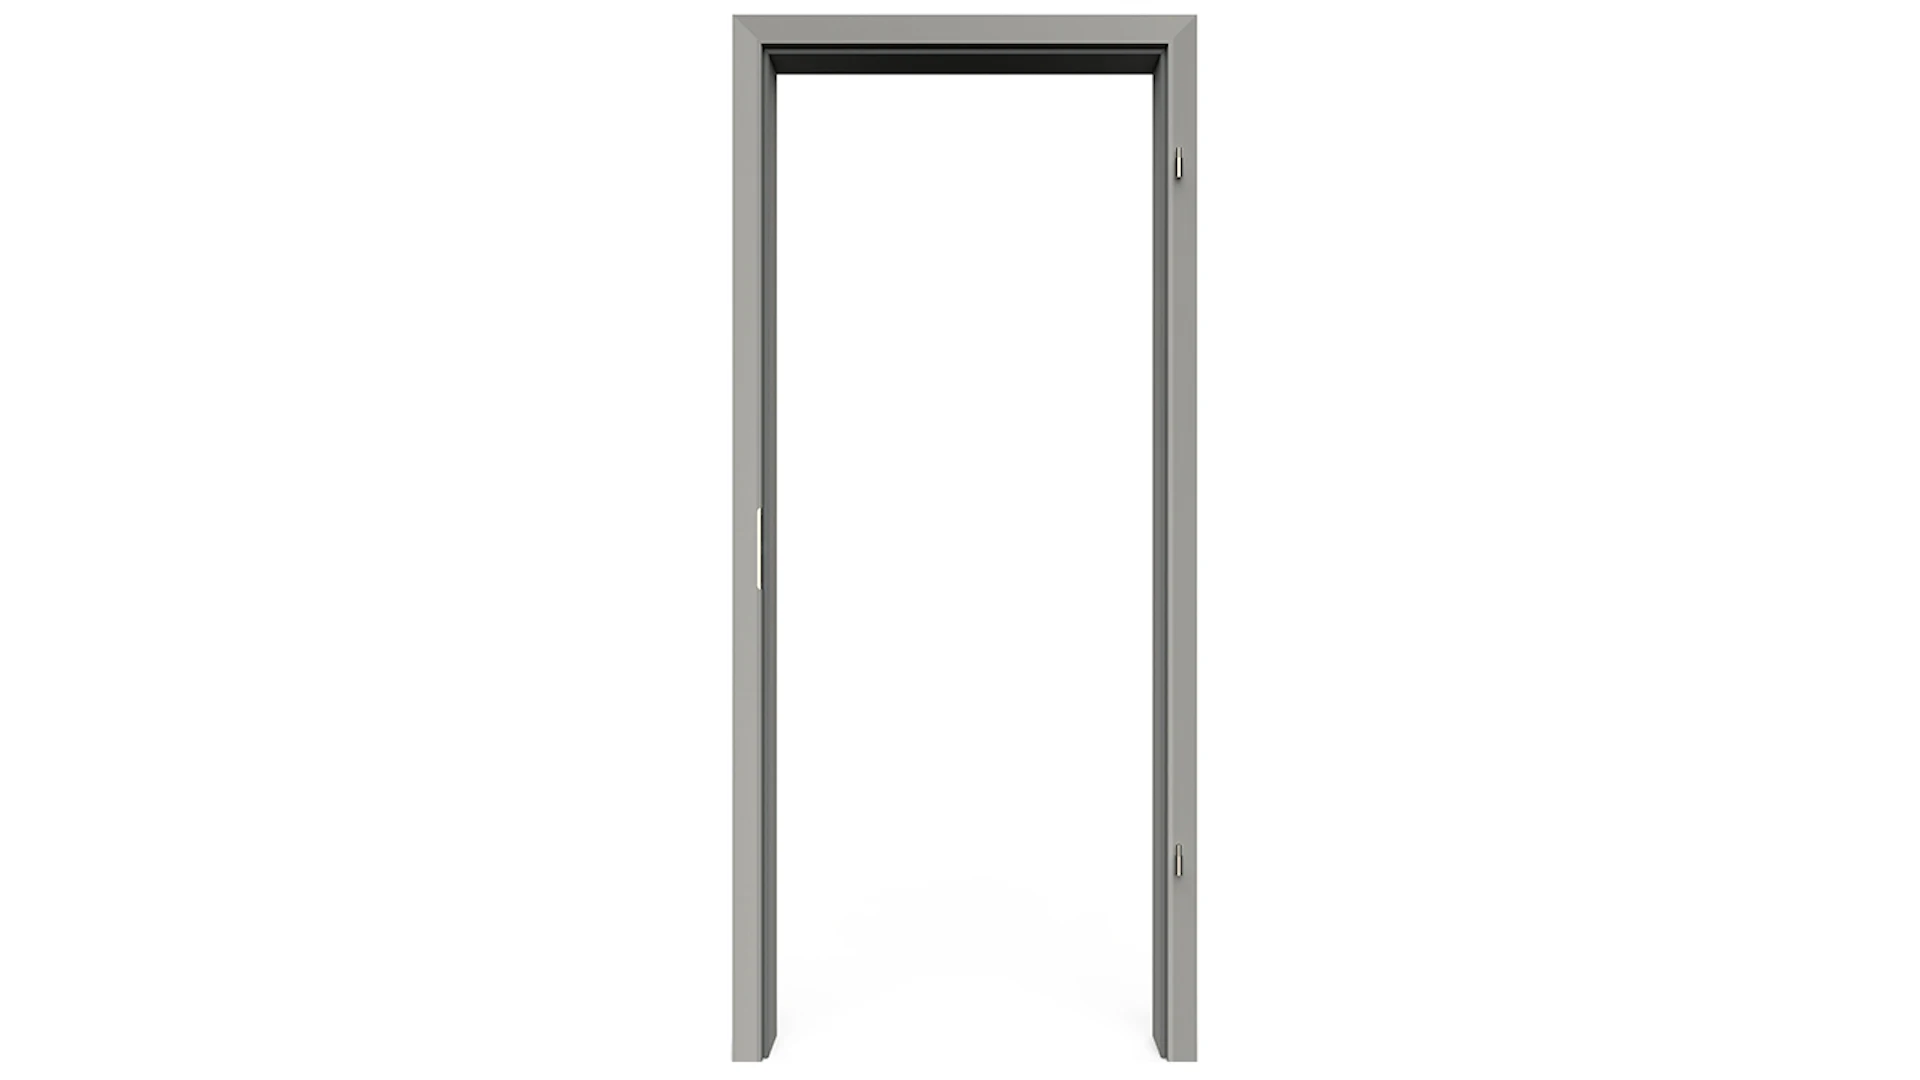 planeo Standard Door frame, rounded edge - CPL Silver grey - 1985 x 610 x 290 mm DIN Left